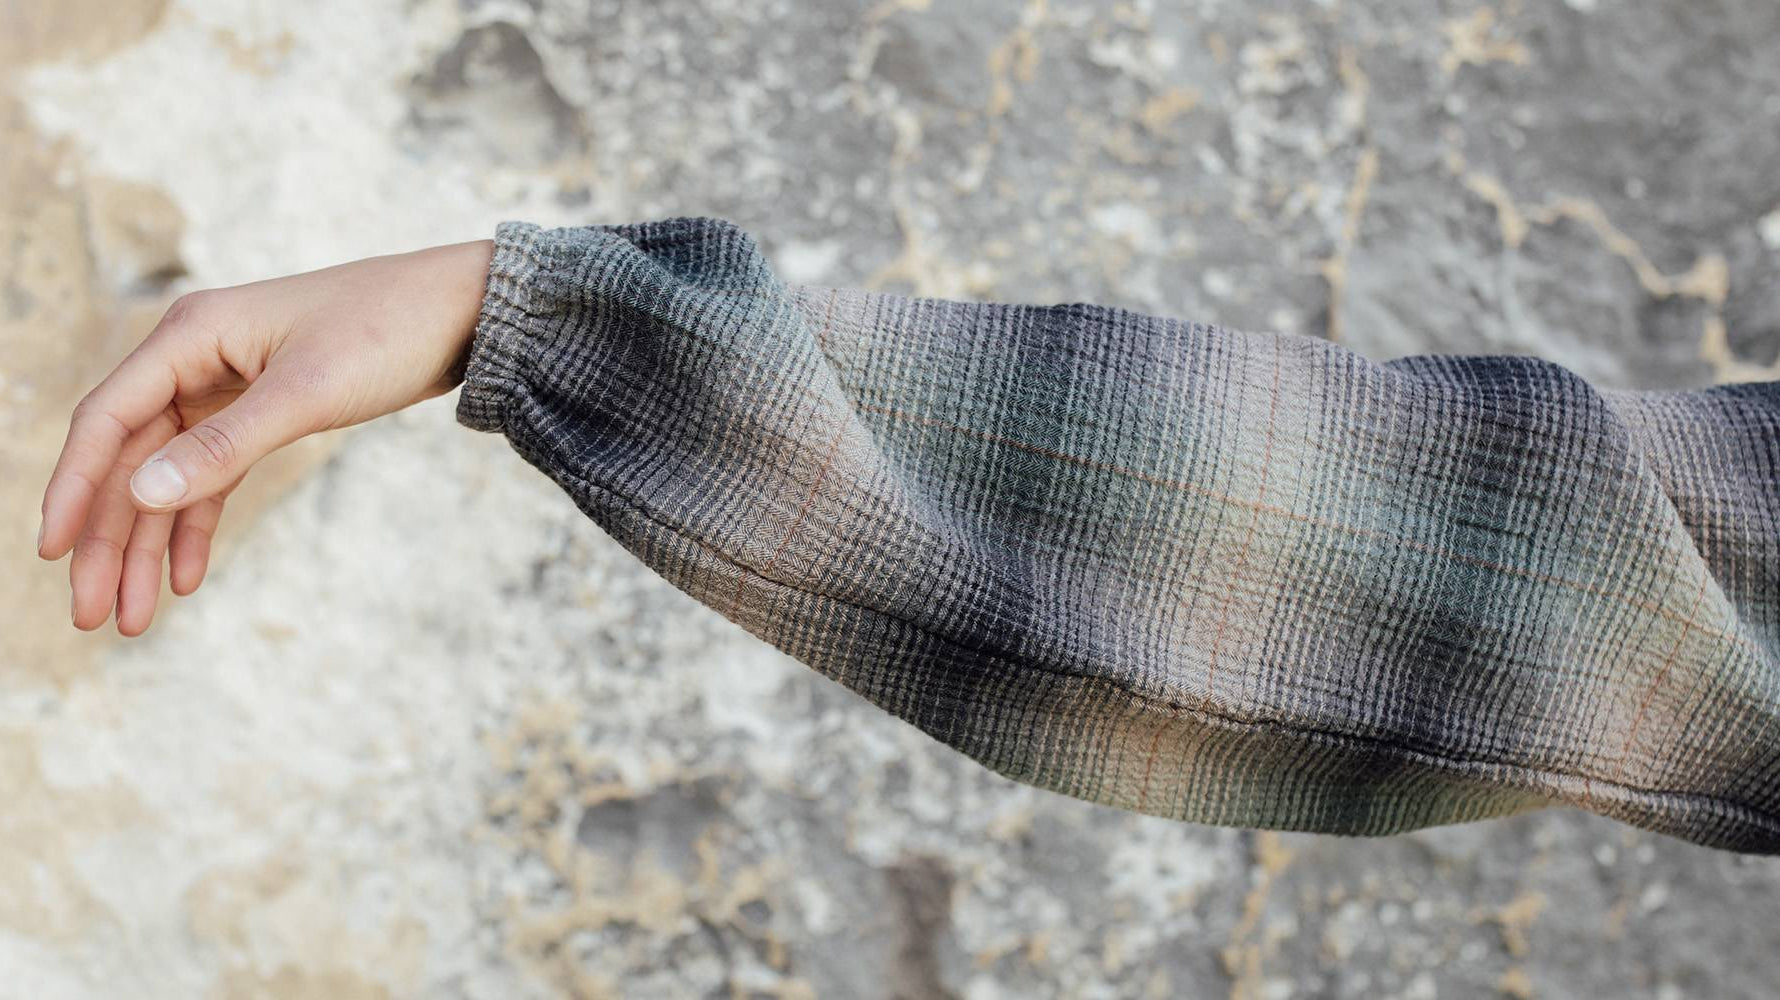 What we’re made of: A deep dive into our fabrics